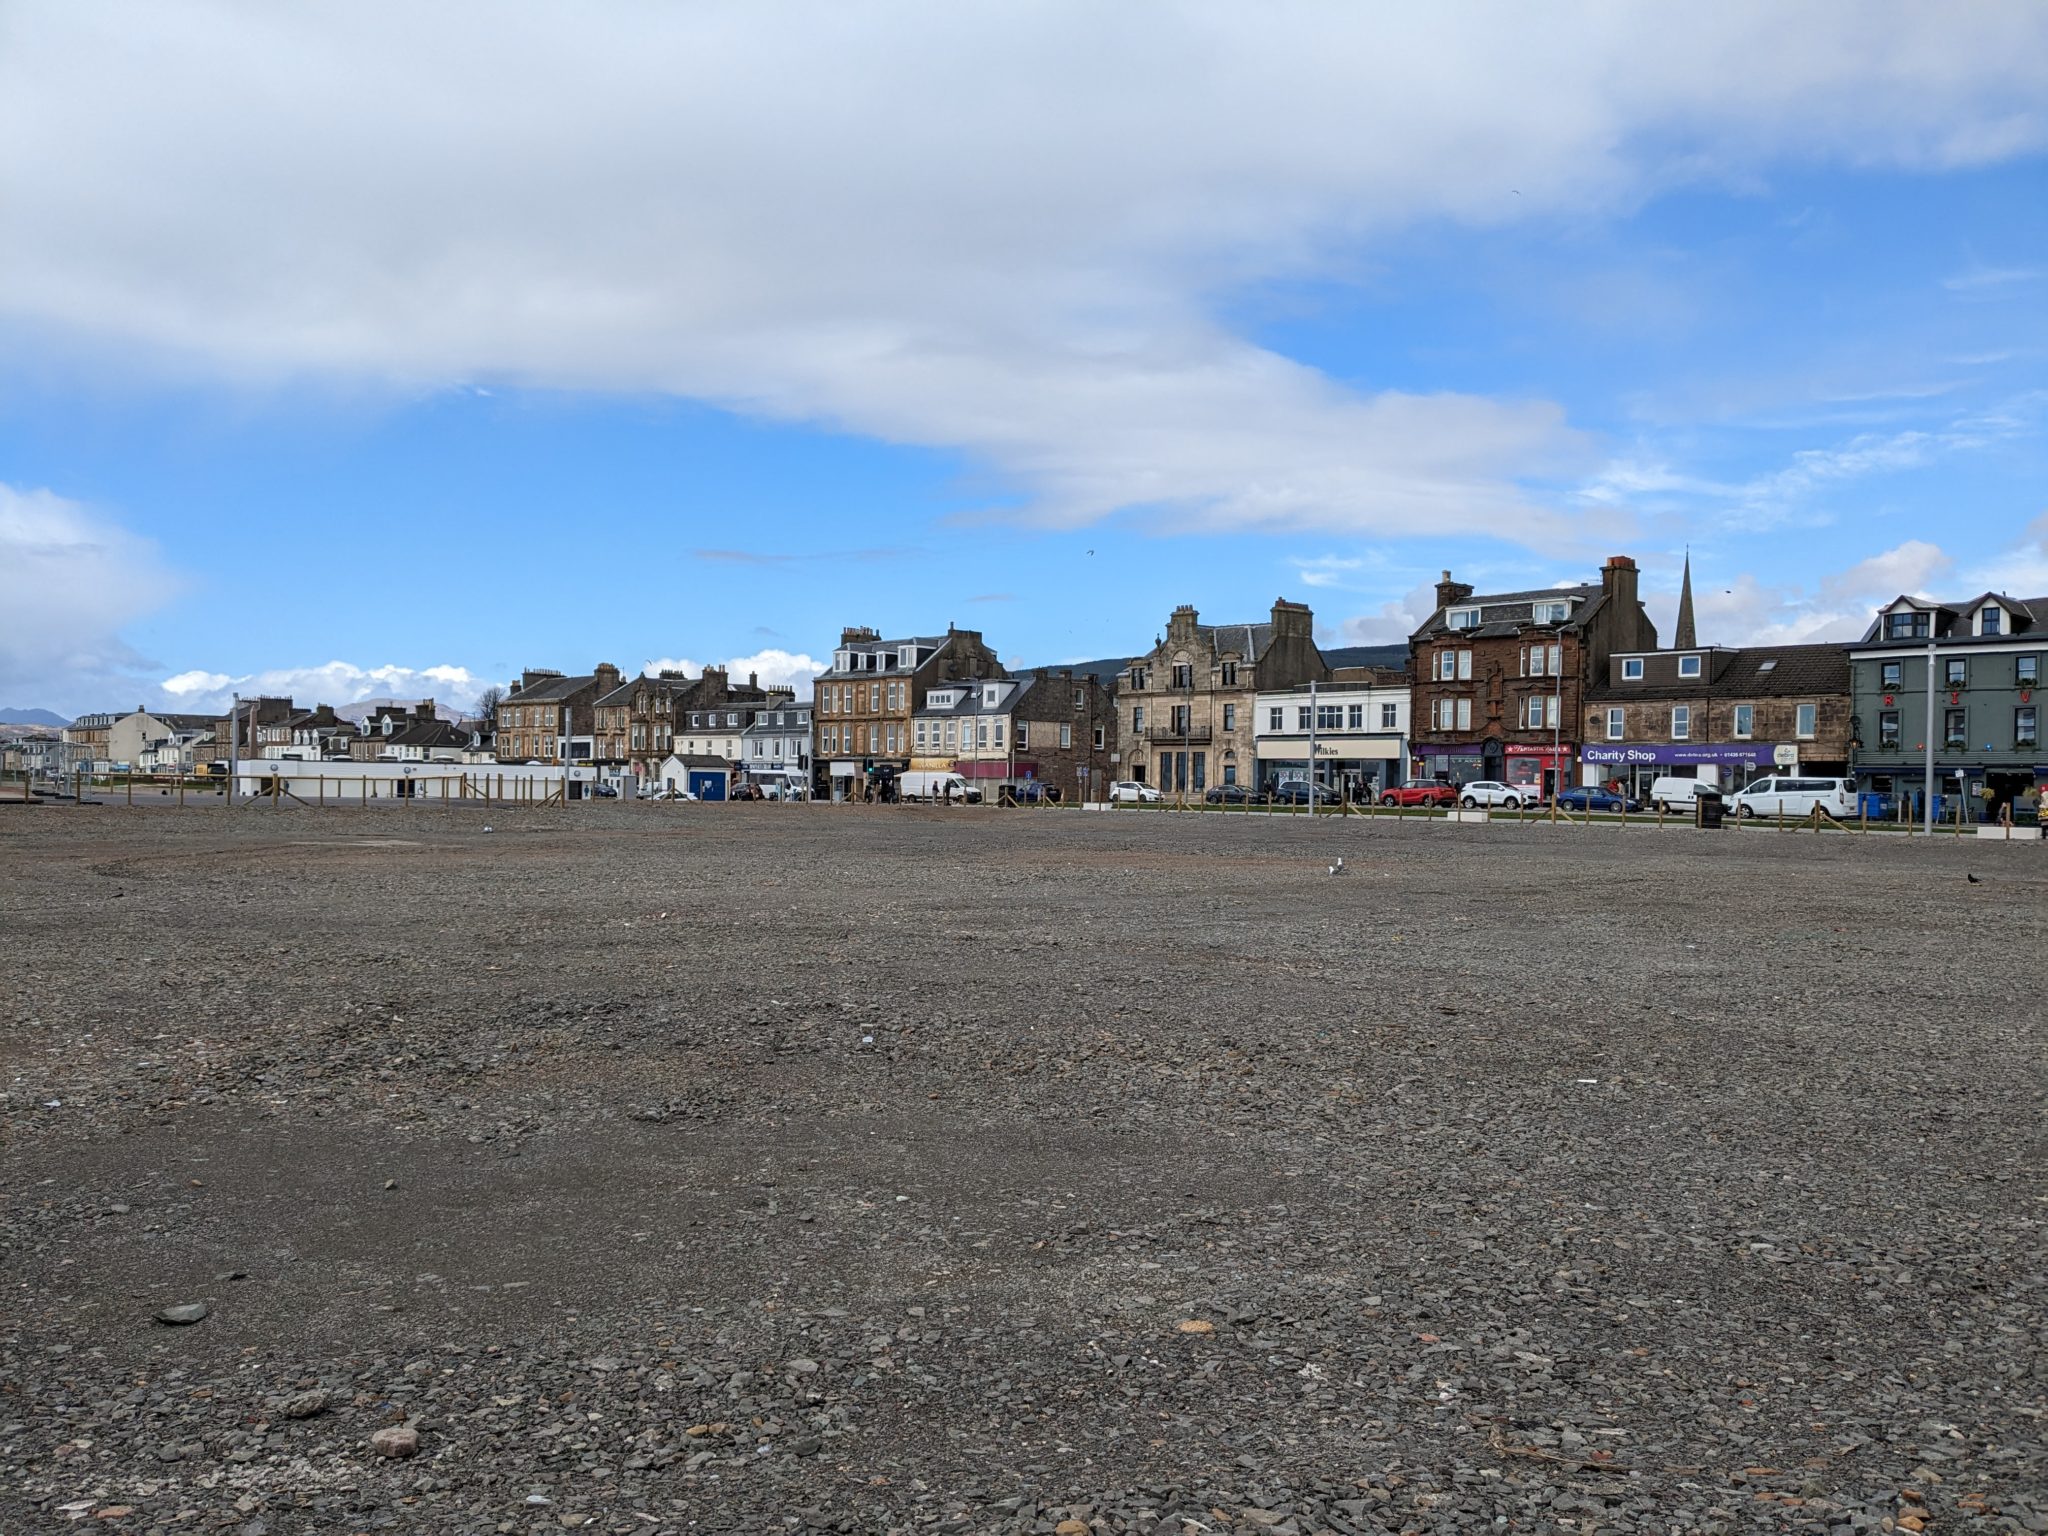 The barren grey site at the pierhead in Helensburgh is shown beneath cloudy blue skies